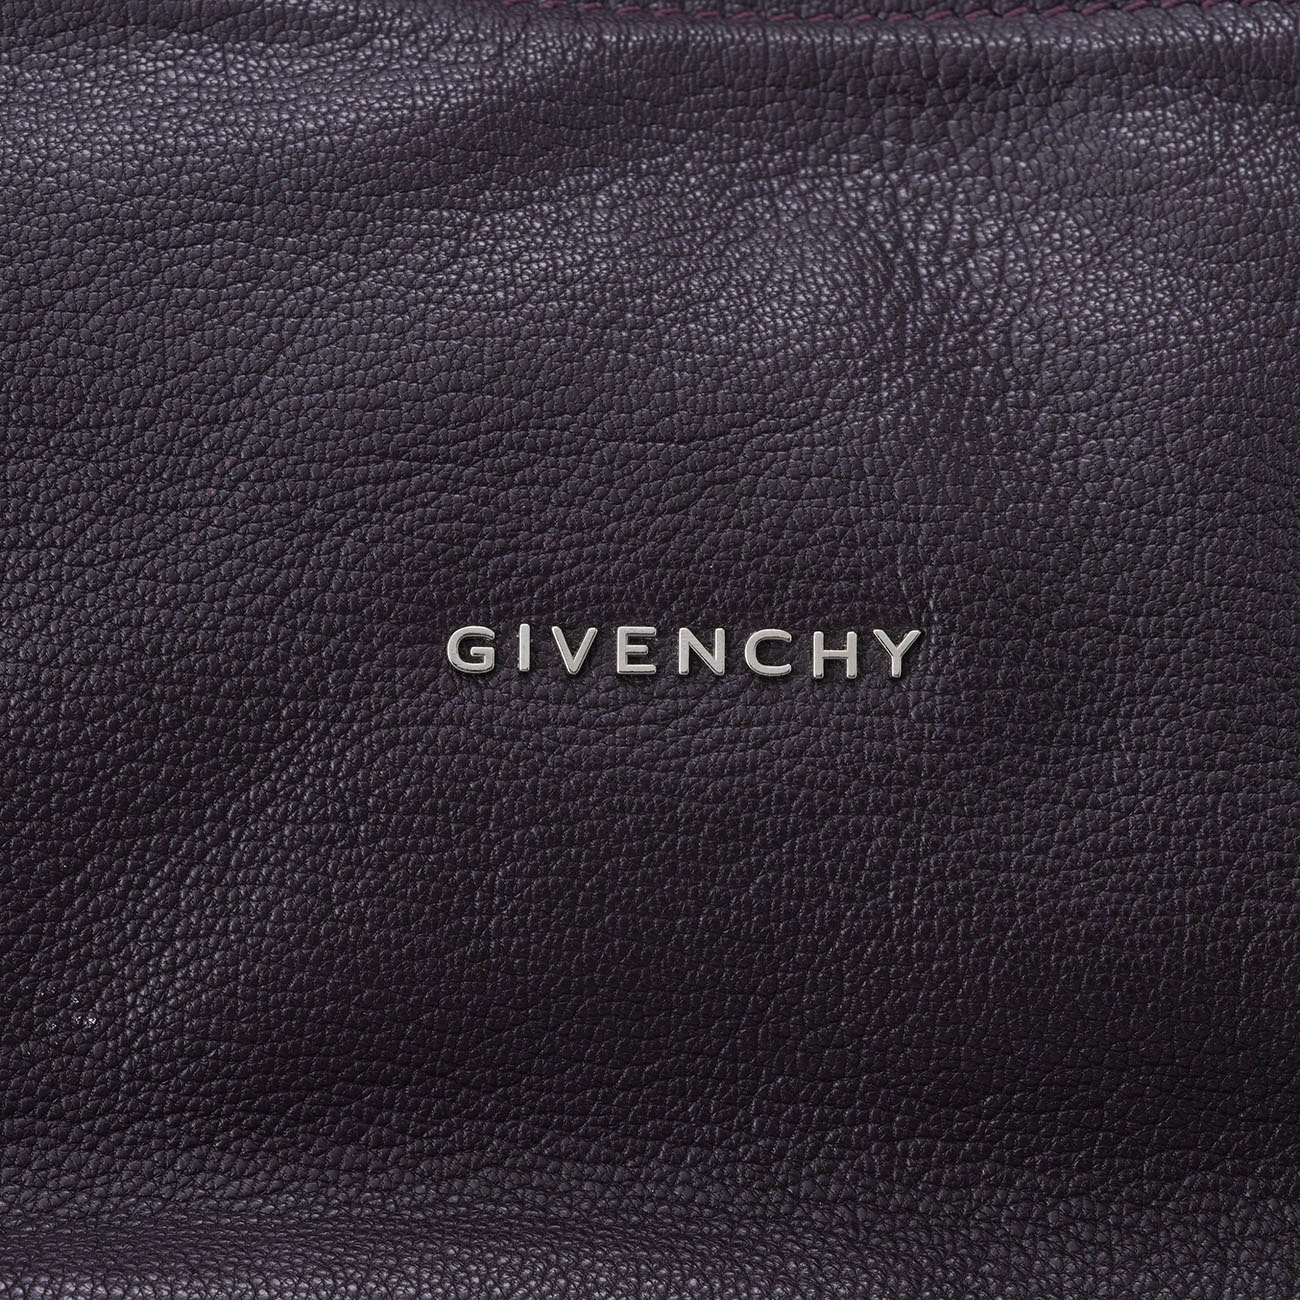 GIVENCHY(USED)지방시 판도라백